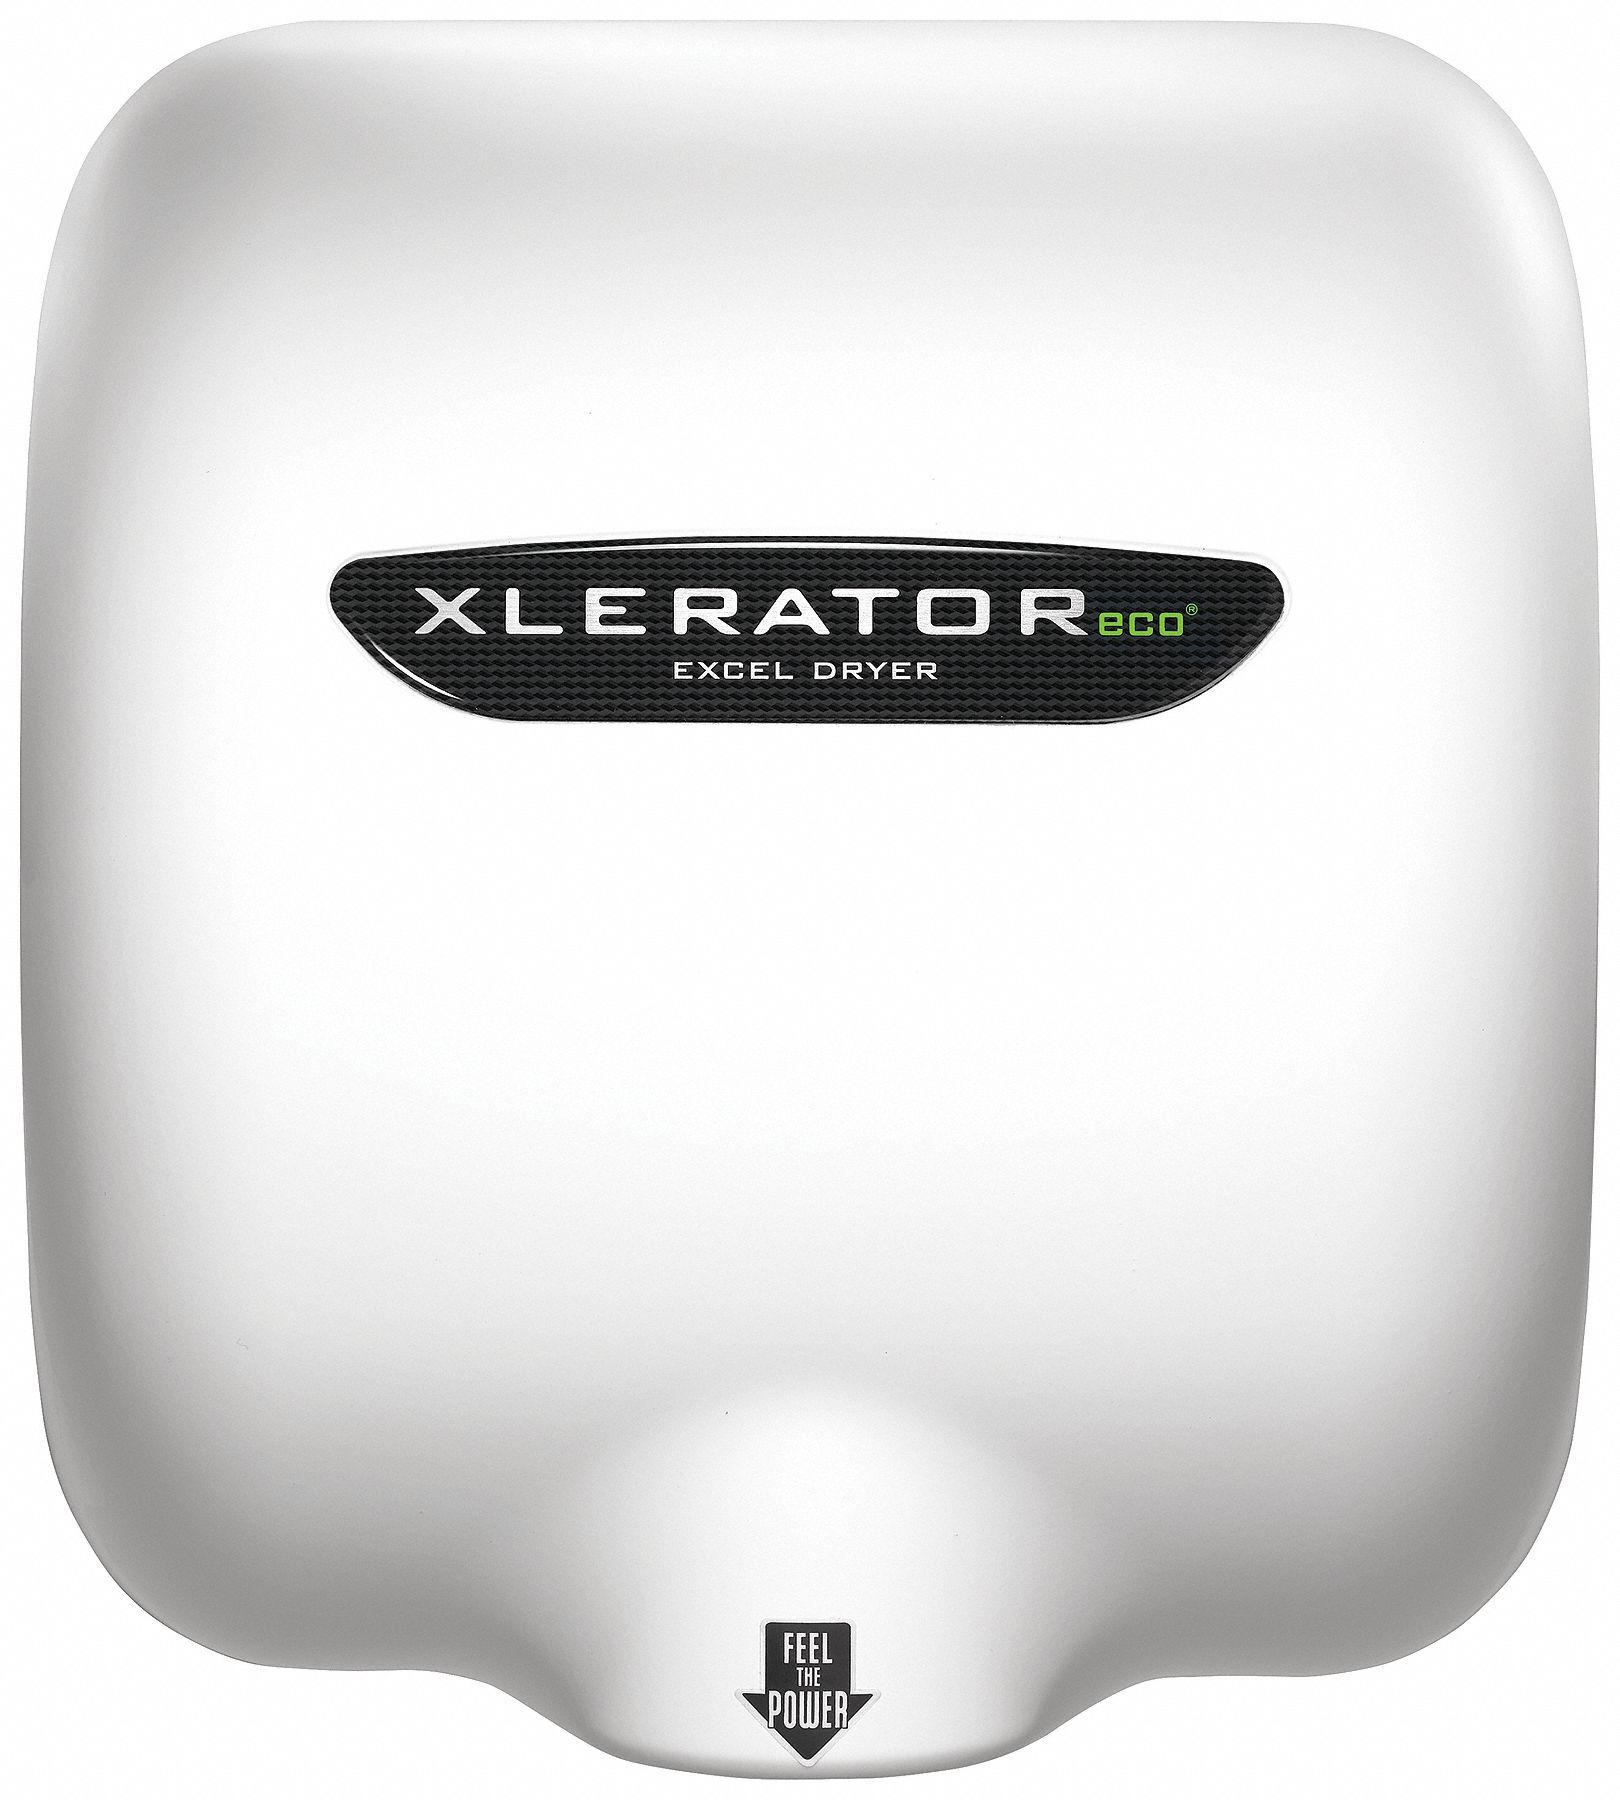 Hand Dryer: Integral, BMC, Auto, White, 12 sec Dry Time, 11.3/12.2 Amps, 110 to 120 Volt